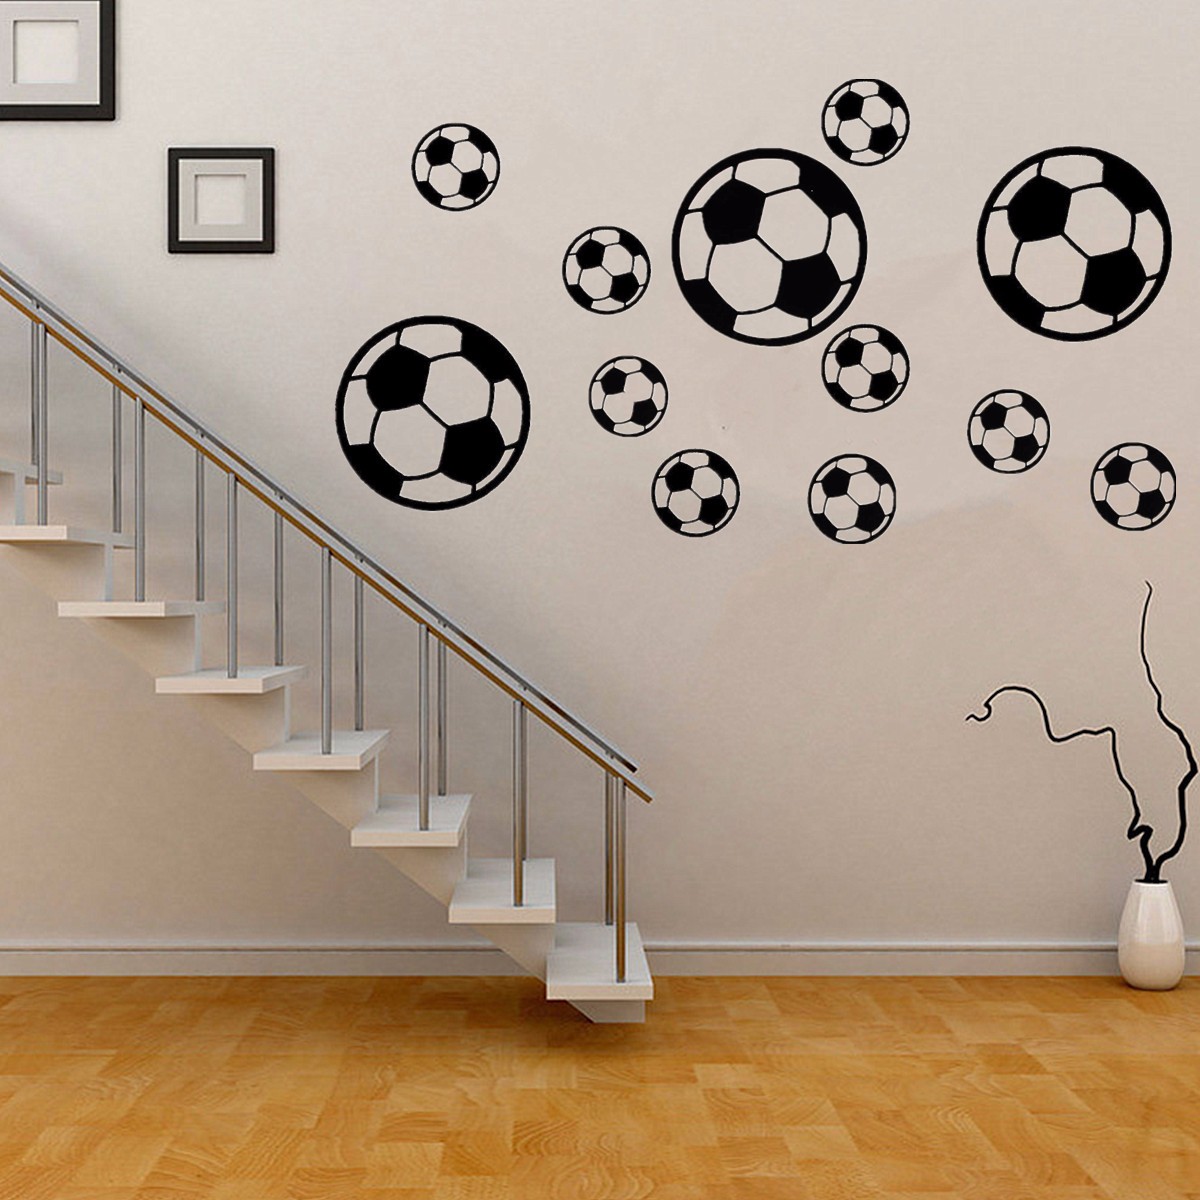 12PcsSet-Football-Soccer-Wall-Stickers-Children-Nursery-Kids-Room-Decals-Gift-Home-Decorations-1470248-8